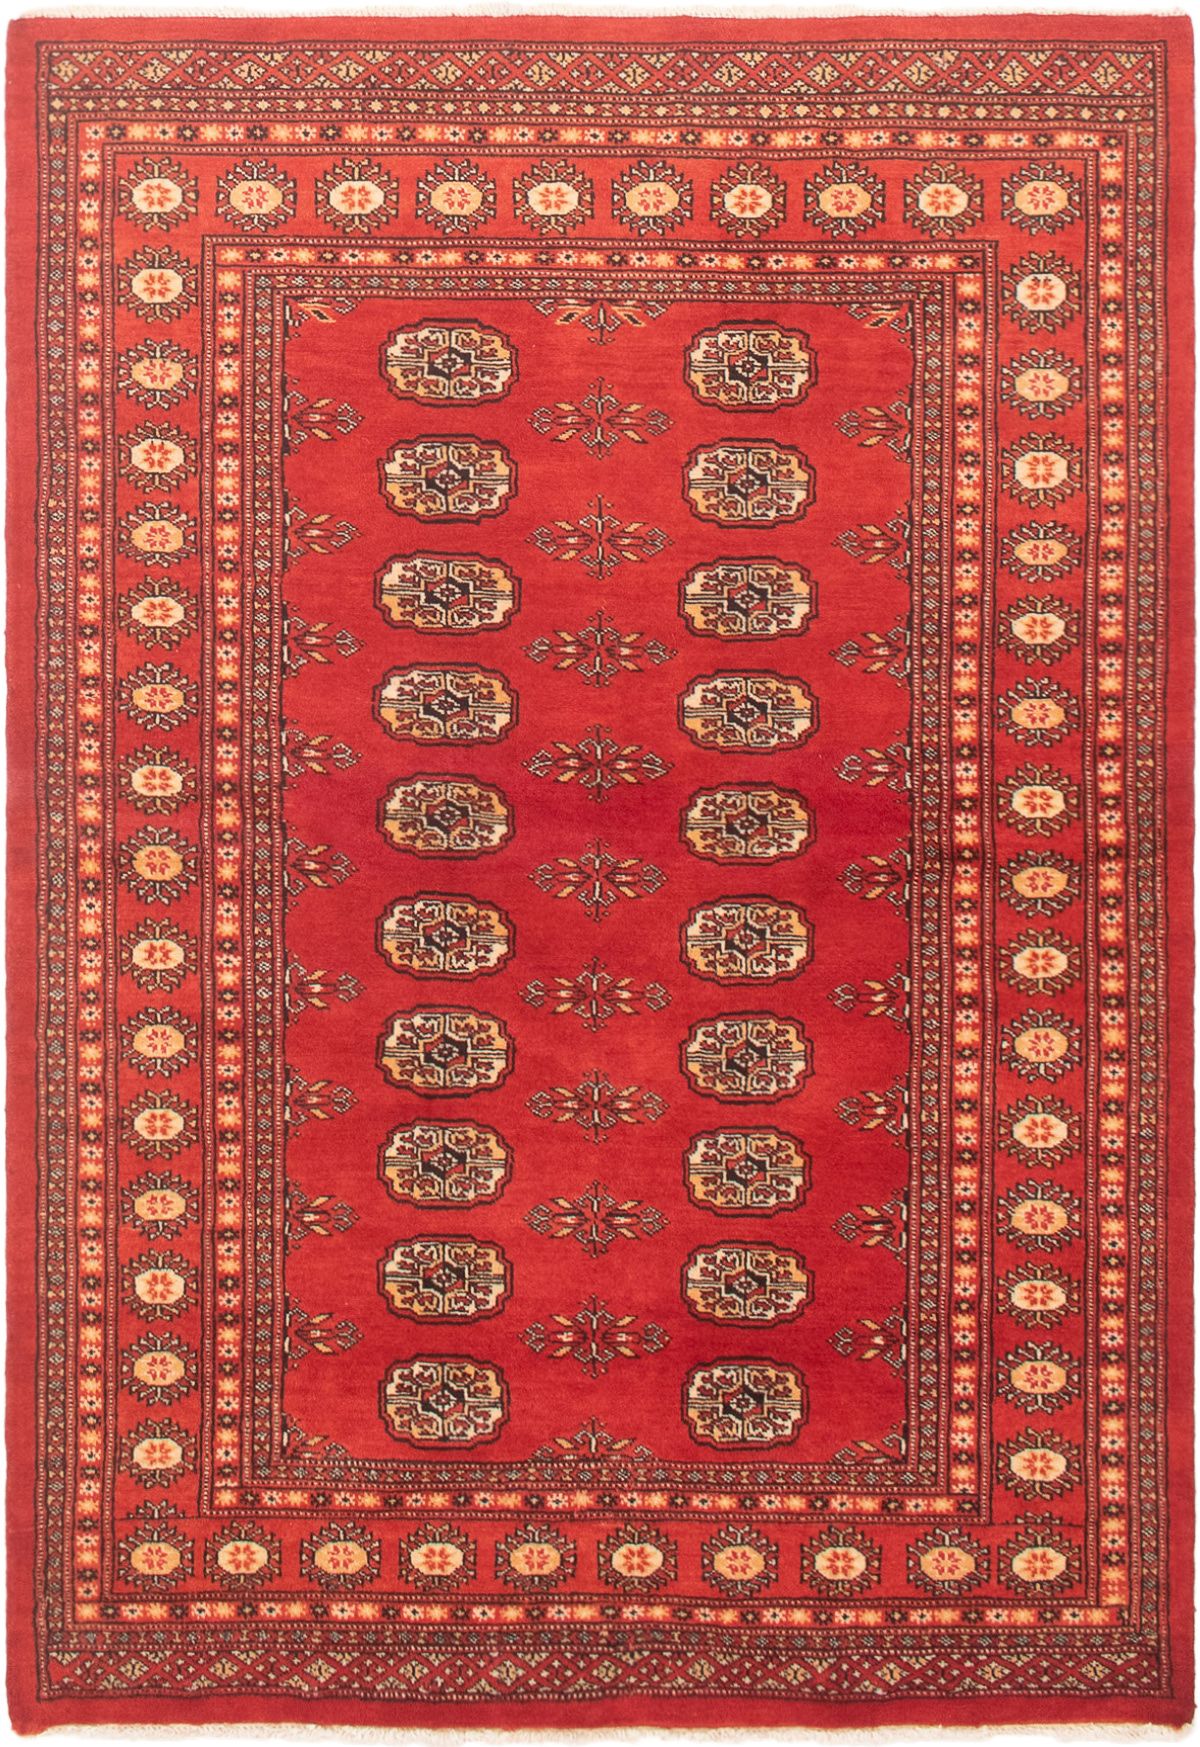 Hand-knotted Finest Peshawar Bokhara Red Wool Rug 4'2" x 6'0"  Size: 4'2" x 6'0"  